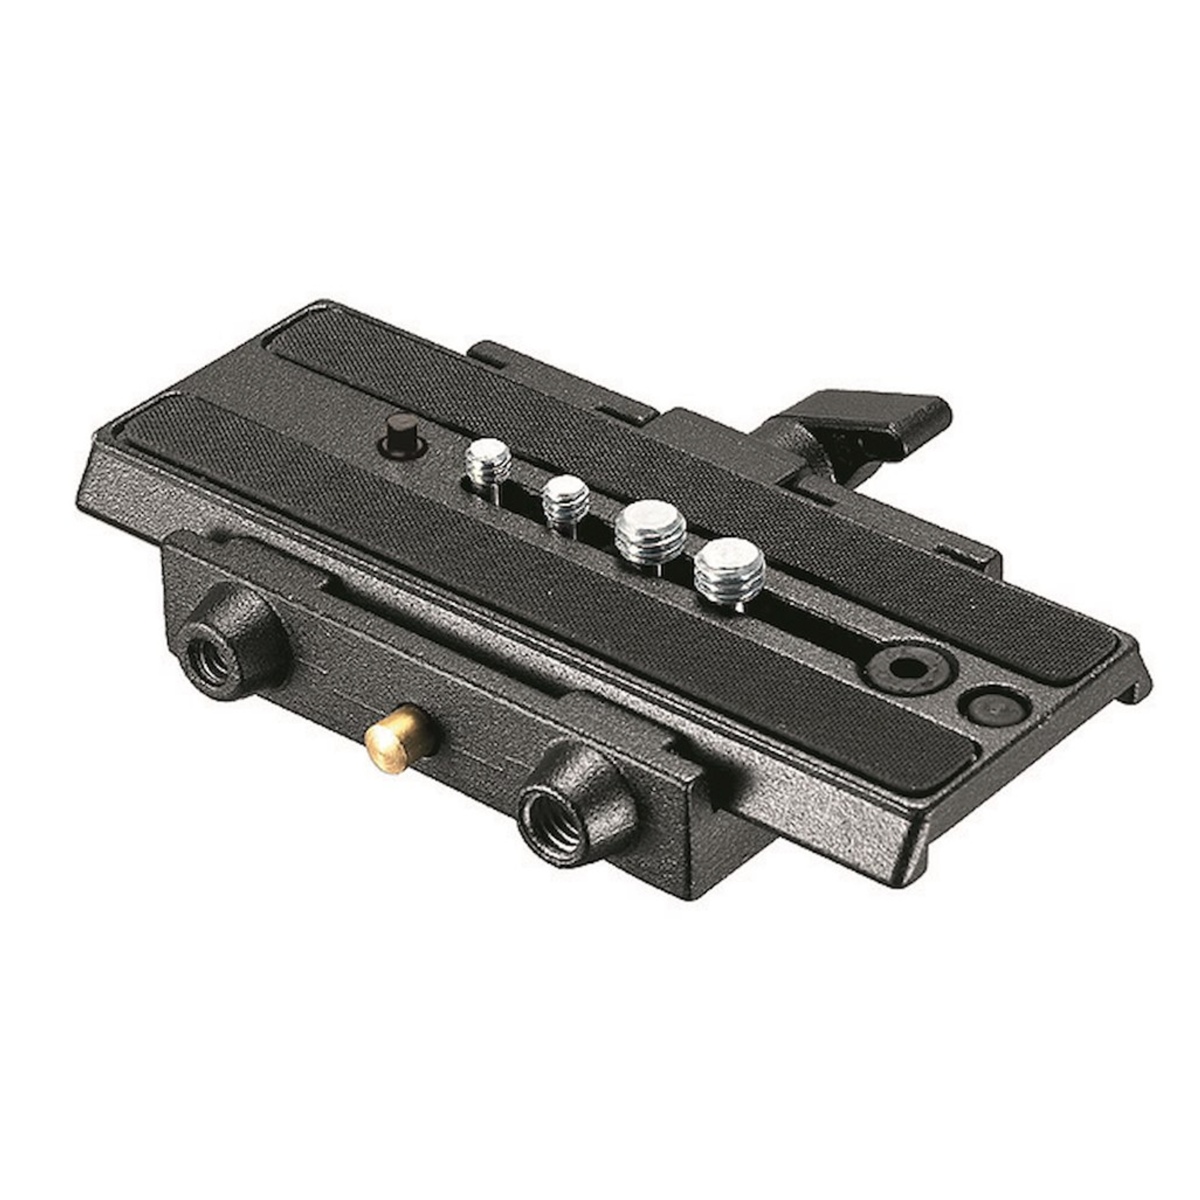 Manfrotto 357 SLIDING PLATE Adapter